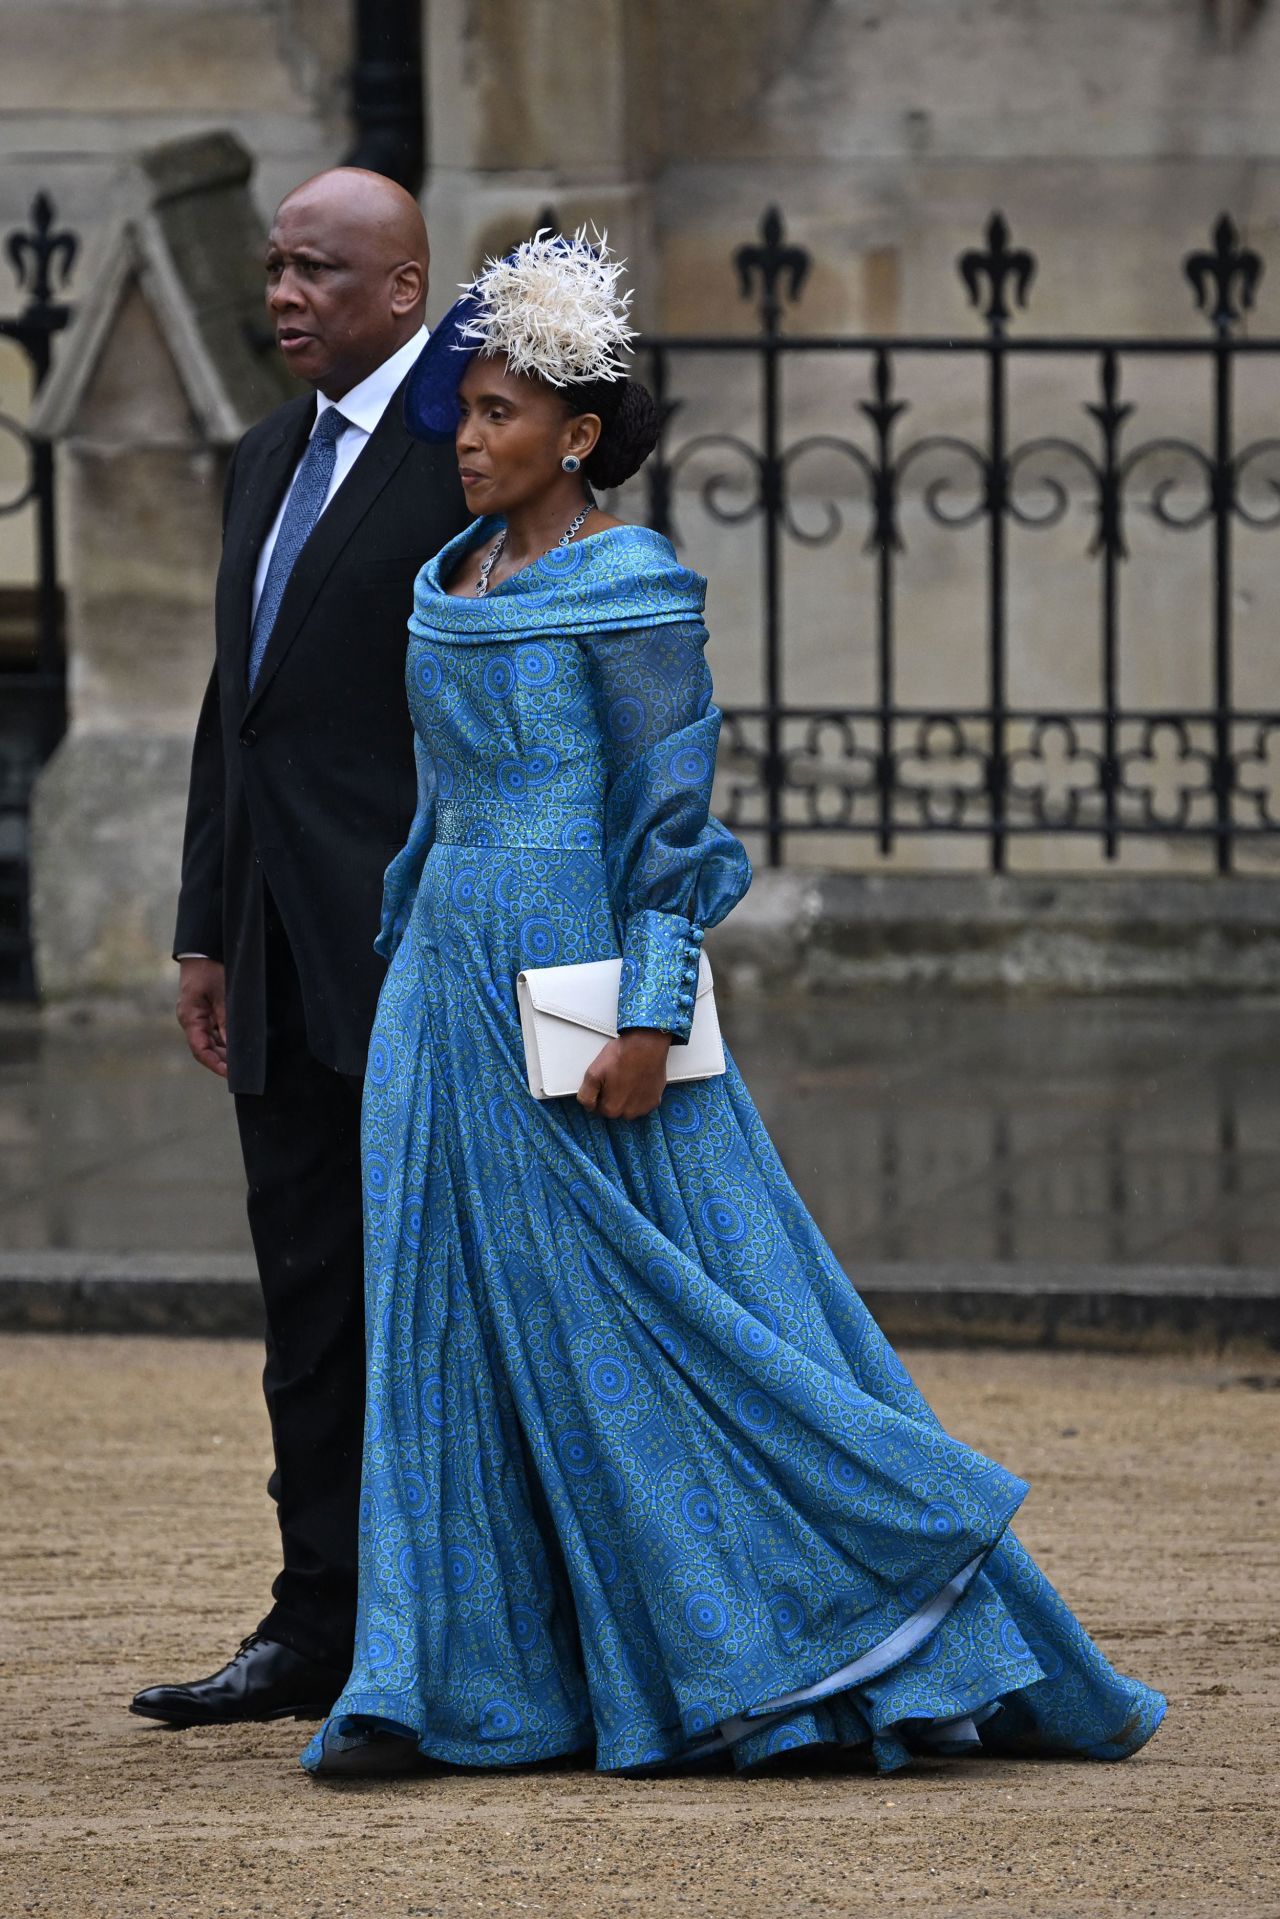 King Letsie III and Masenate Mohato Seeiso, Queen of Lesotho arrive at Westminster Abbey.